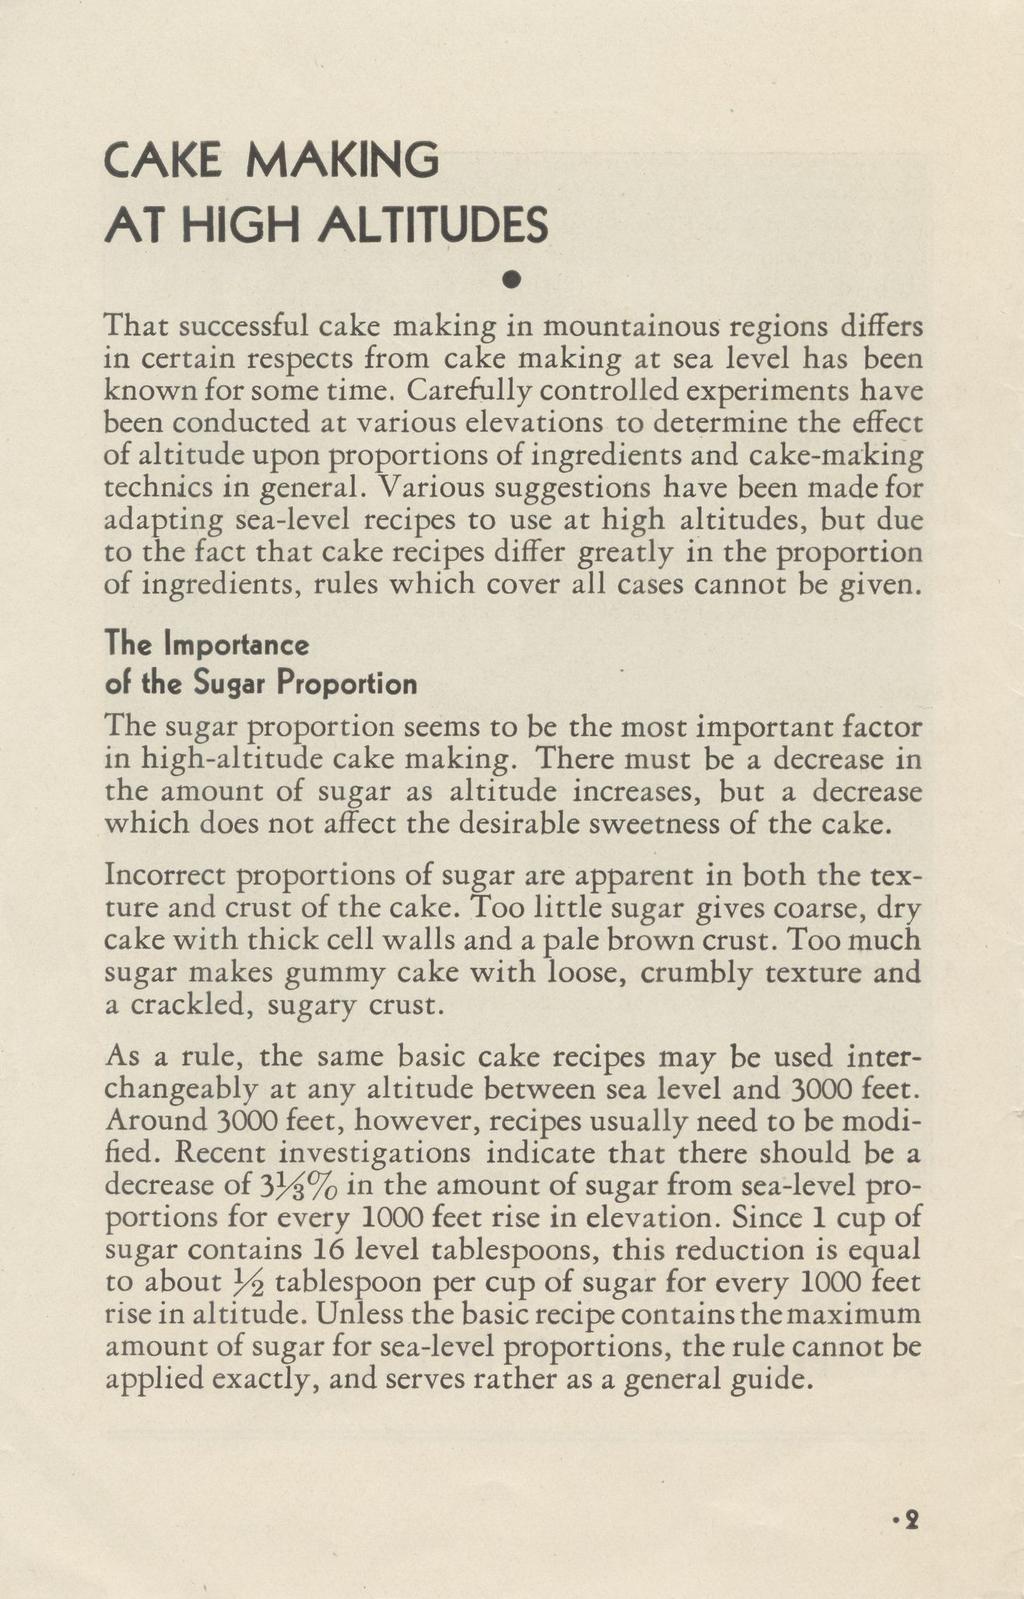 CAKE MAKING AT HIGH ALTITUDES That successful cake making in mountainous regions differs in certain respects from cake making at sea level has been known for some time.